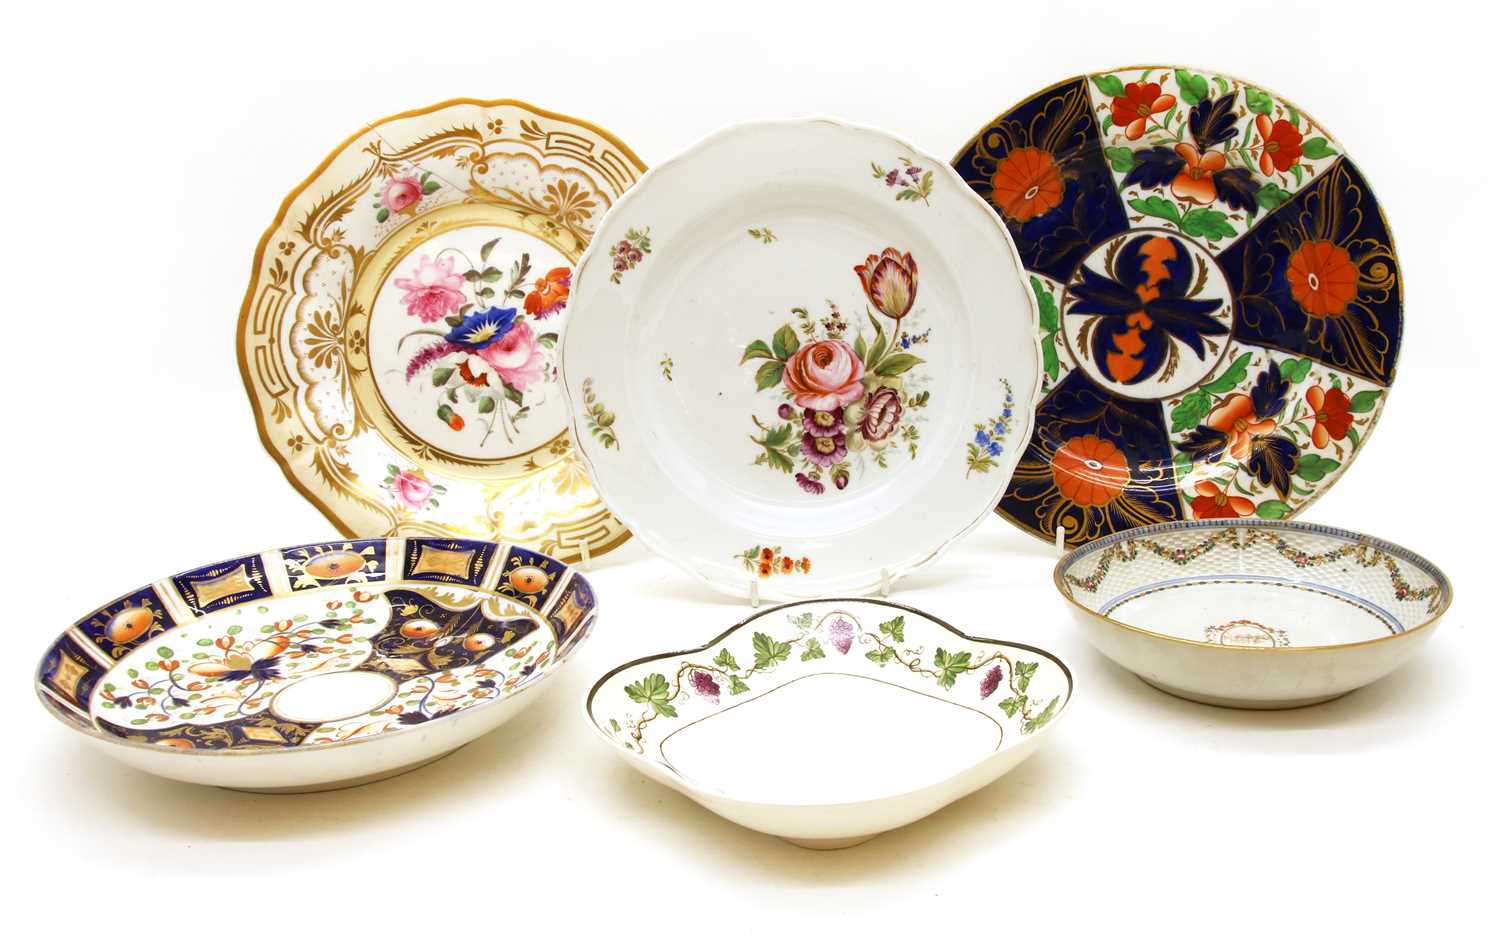 Lot 184 - A collection of ceramics plates and dishes